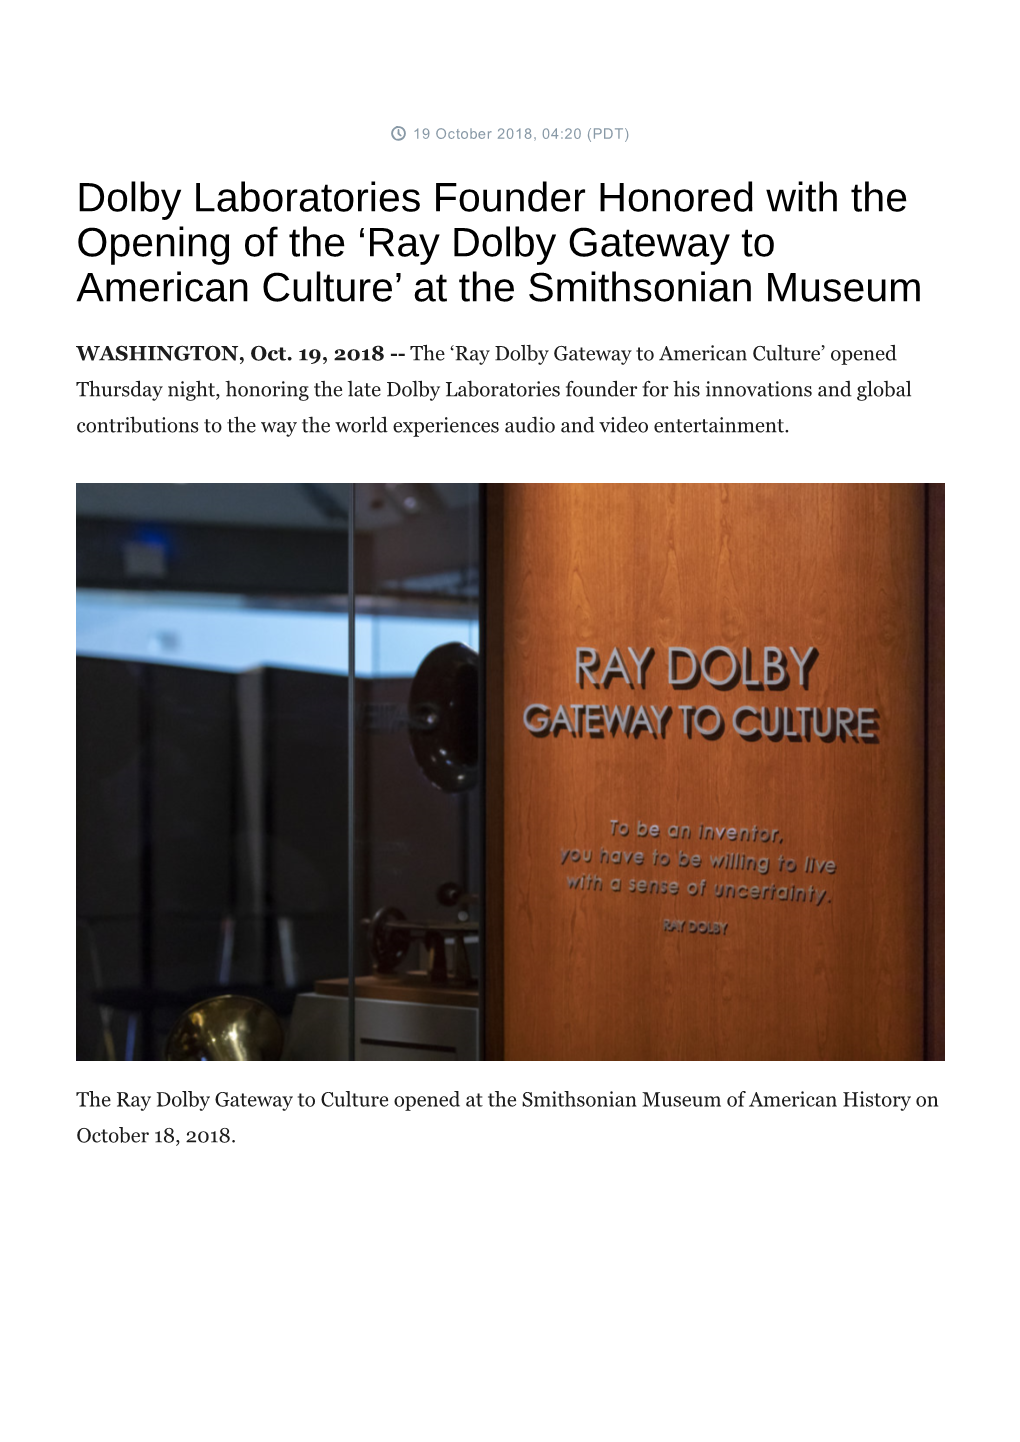 Dolby Laboratories Founder Honored with the Opening of the 'Ray Dolby